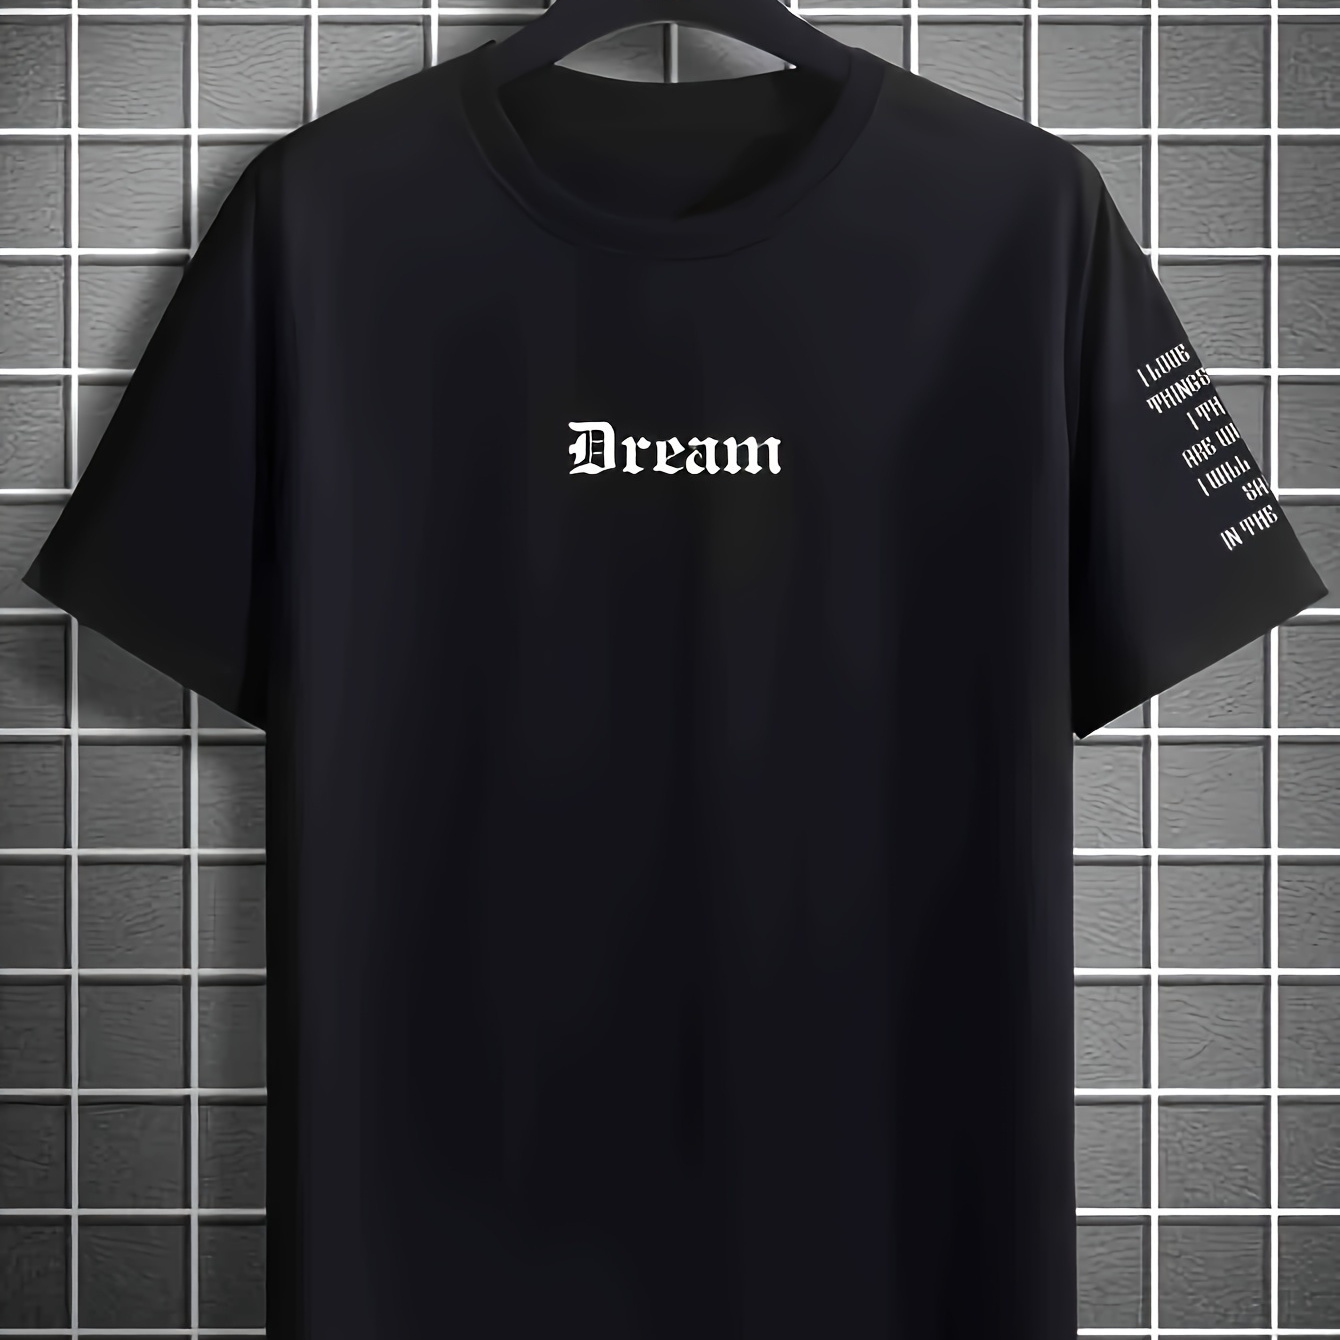 

Men's Dream Graphic Print T-shirt, Casual Short Sleeve Crew Neck Tee, Men's Clothing For Outdoor